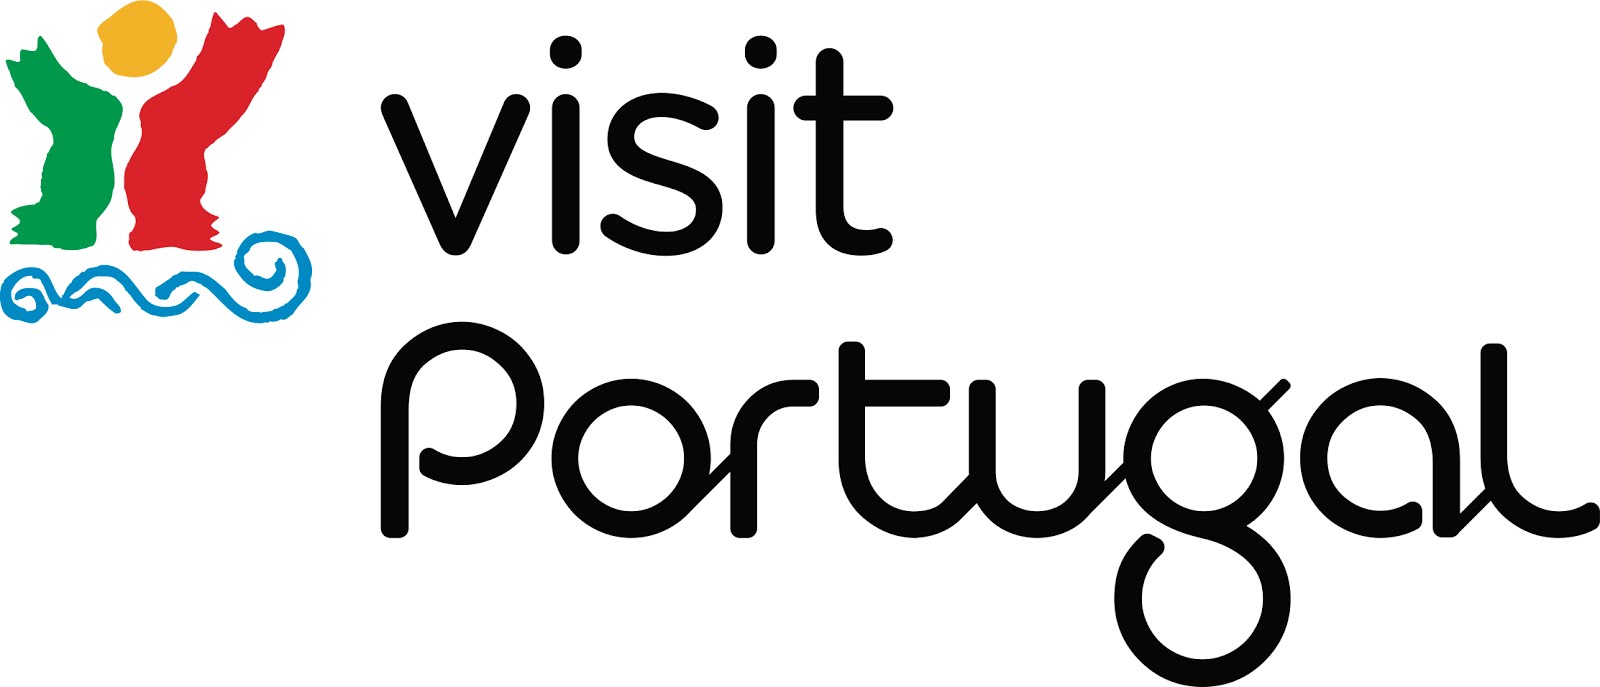 more information about portugal: